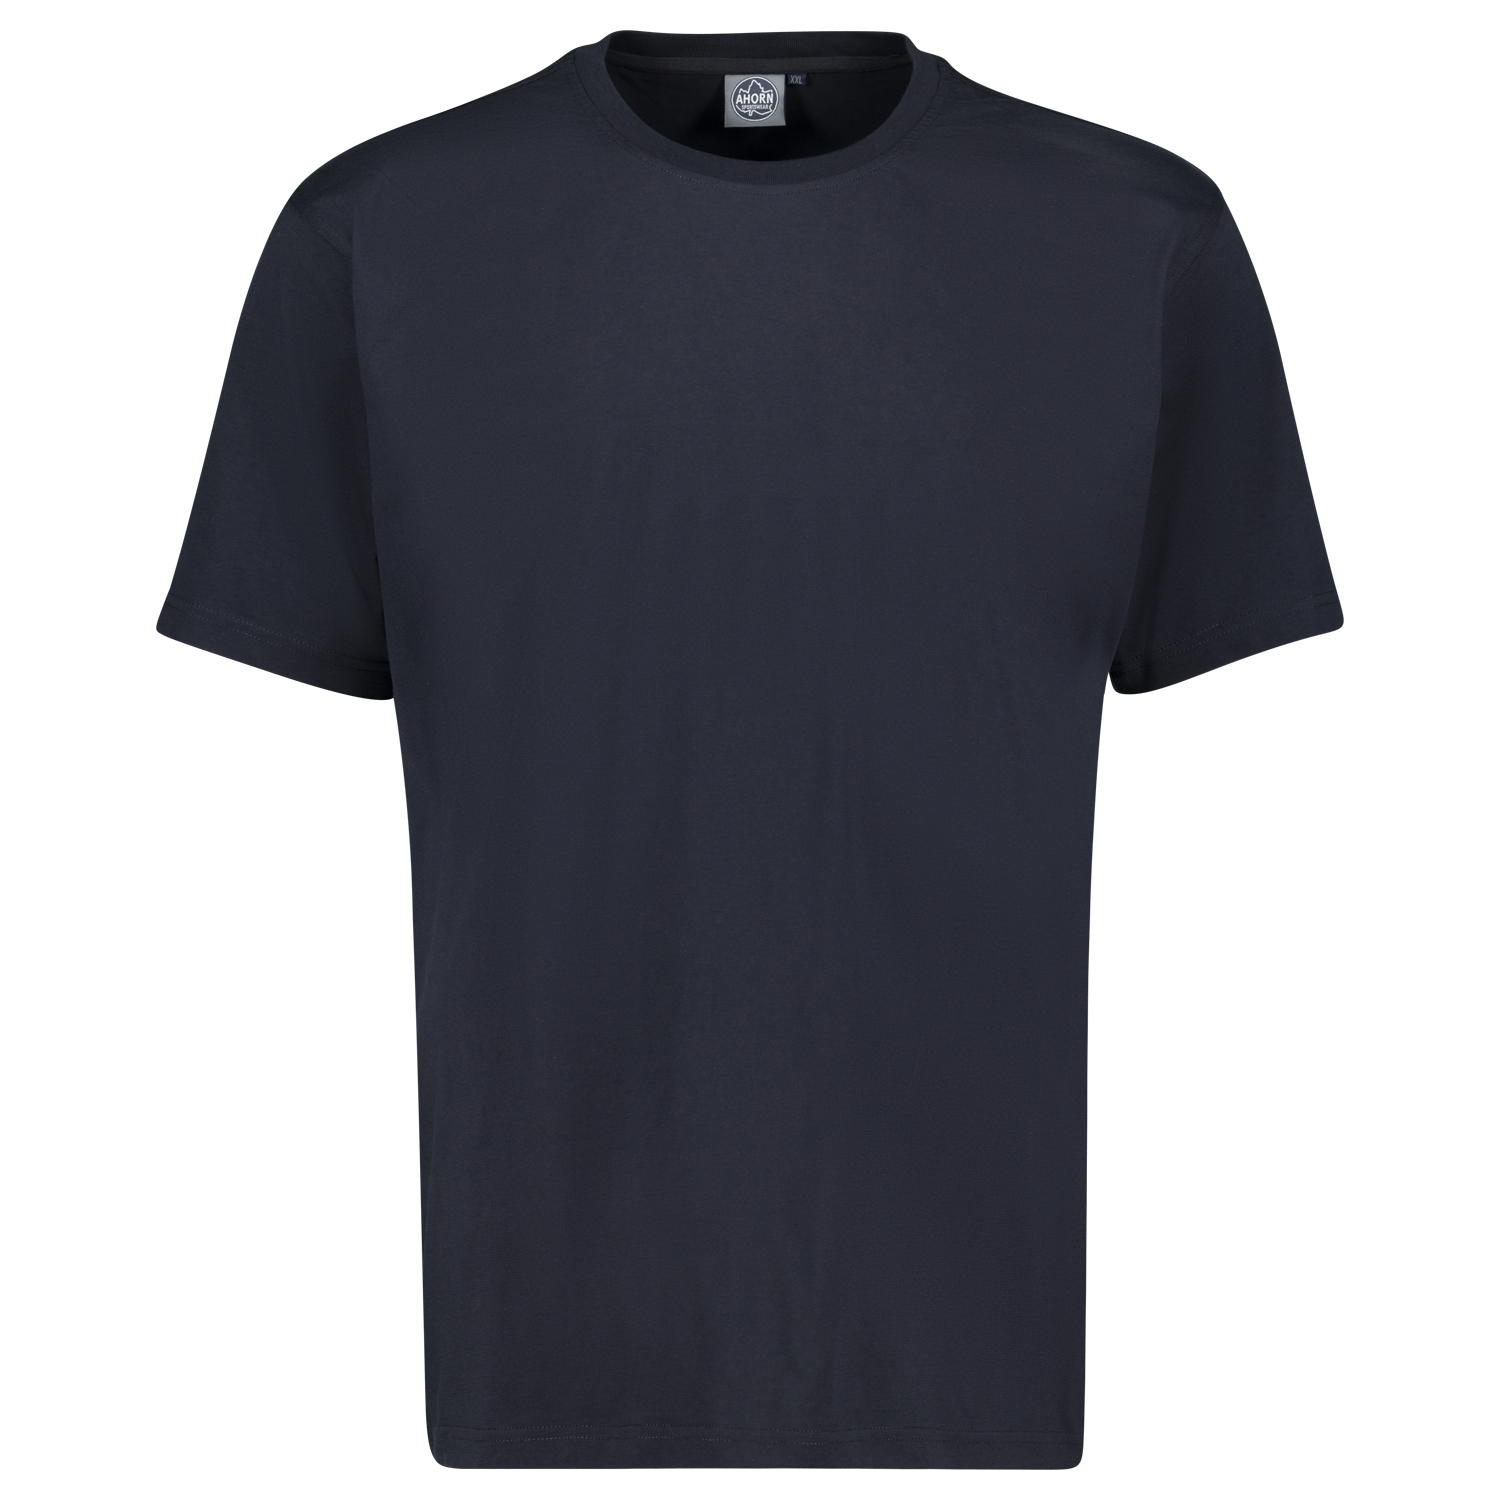 T-shirt for men in dark blue by Ahorn Sportswear up to oversize 10XL